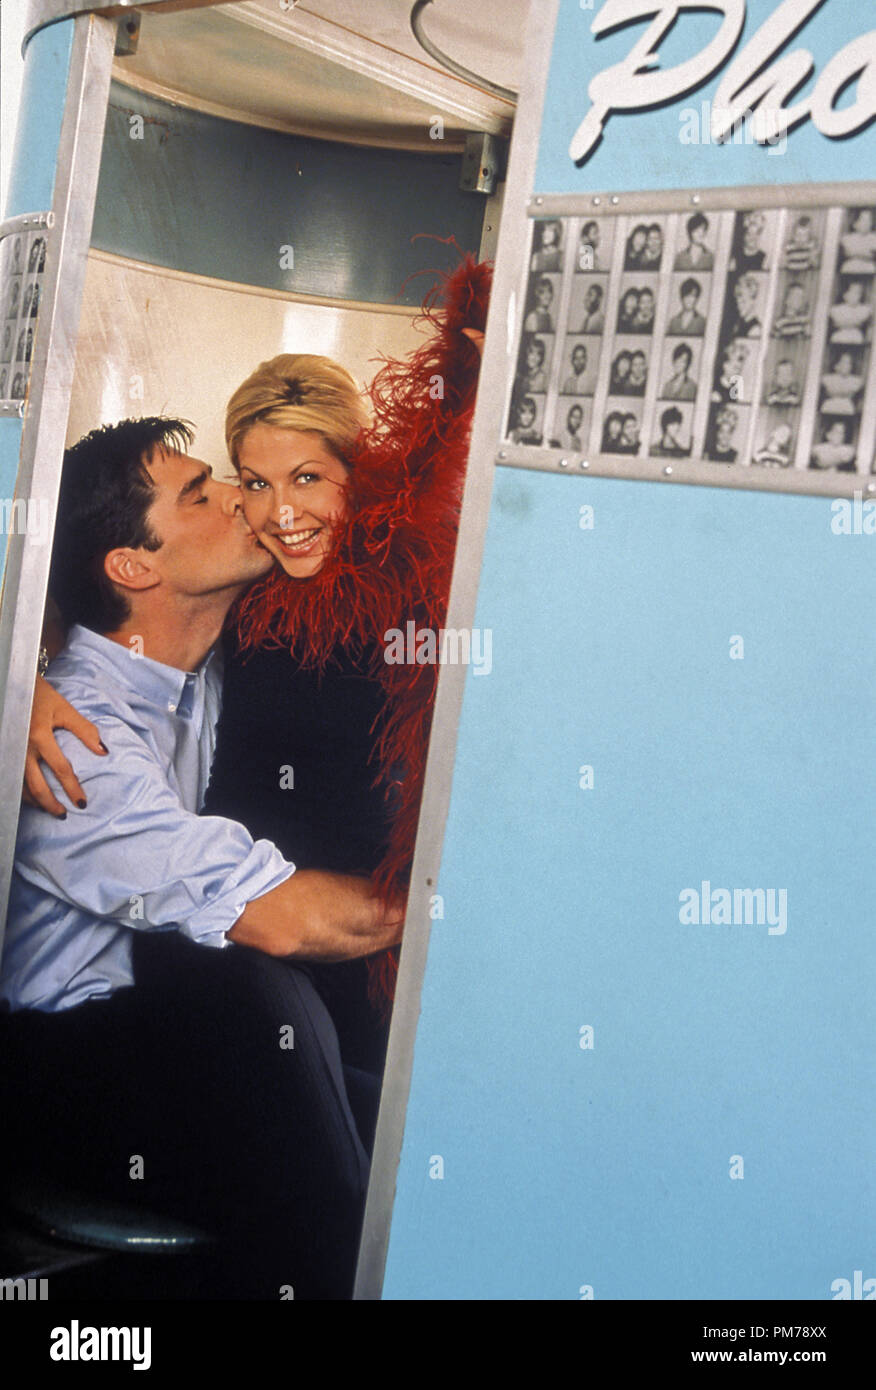 Film Still from 'Dharma & Greg' Jenna Elfman, Thomas Gibson 1998 Photo Credit: Bob D'Amico   File Reference # 30996565THA  For Editorial Use Only -  All Rights Reserved Stock Photo